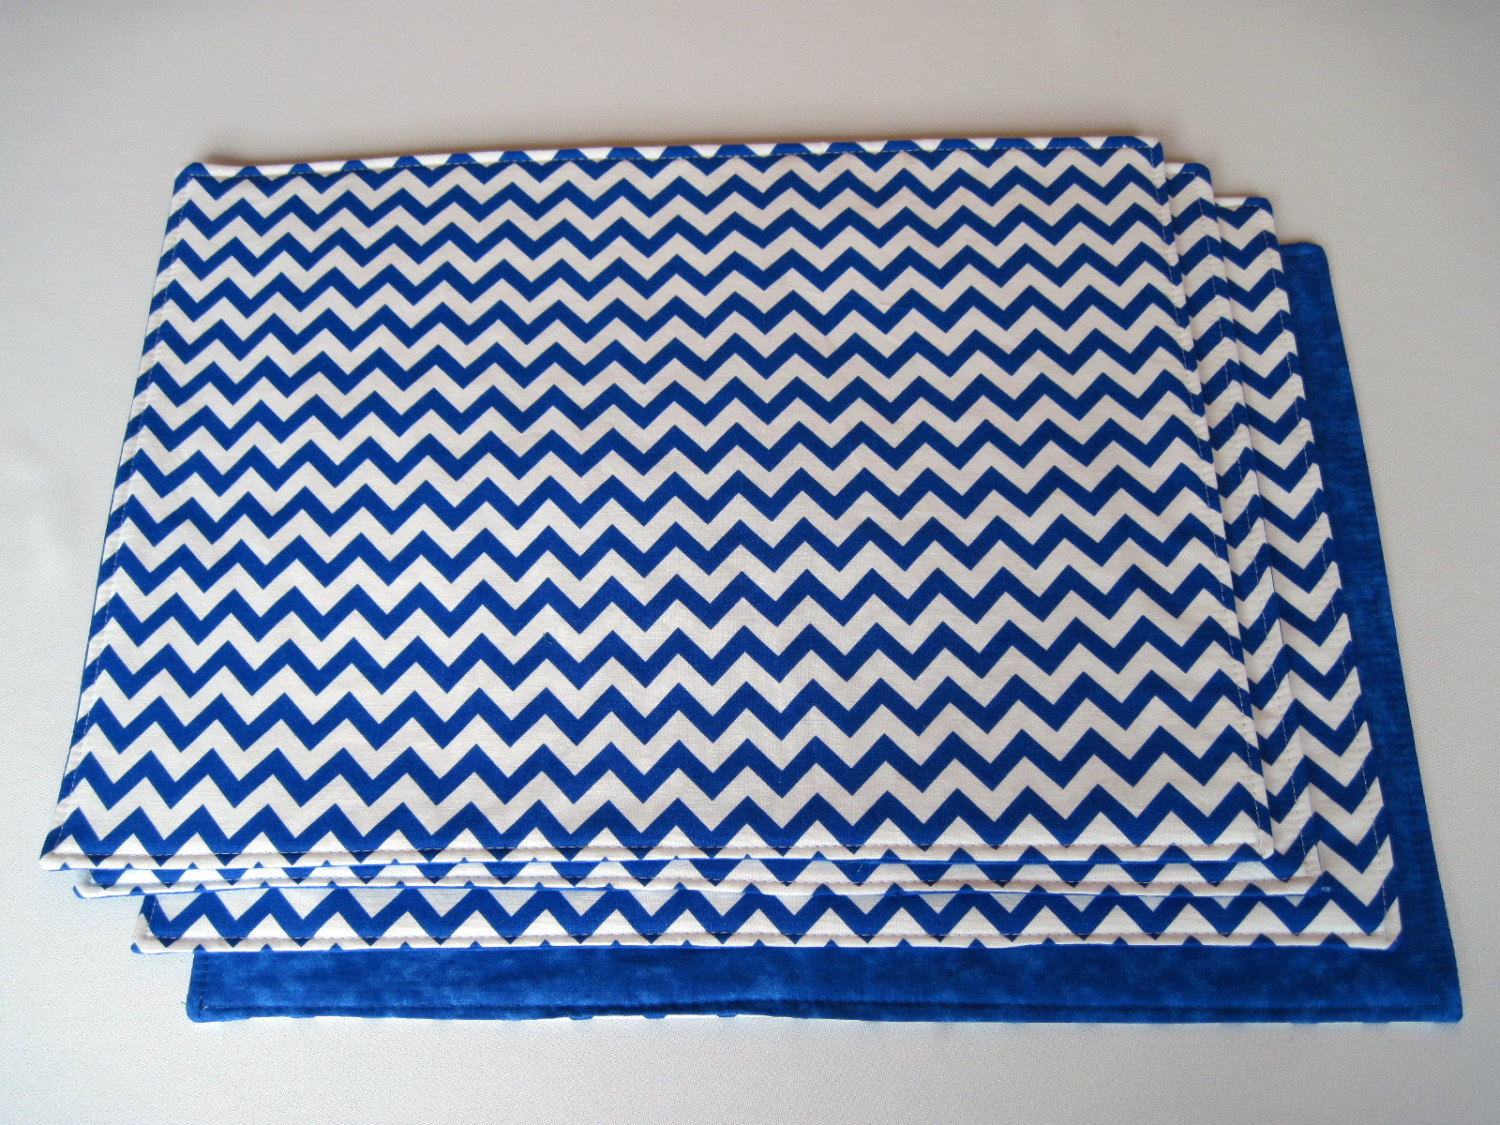 Blue and white chevron placemats set of